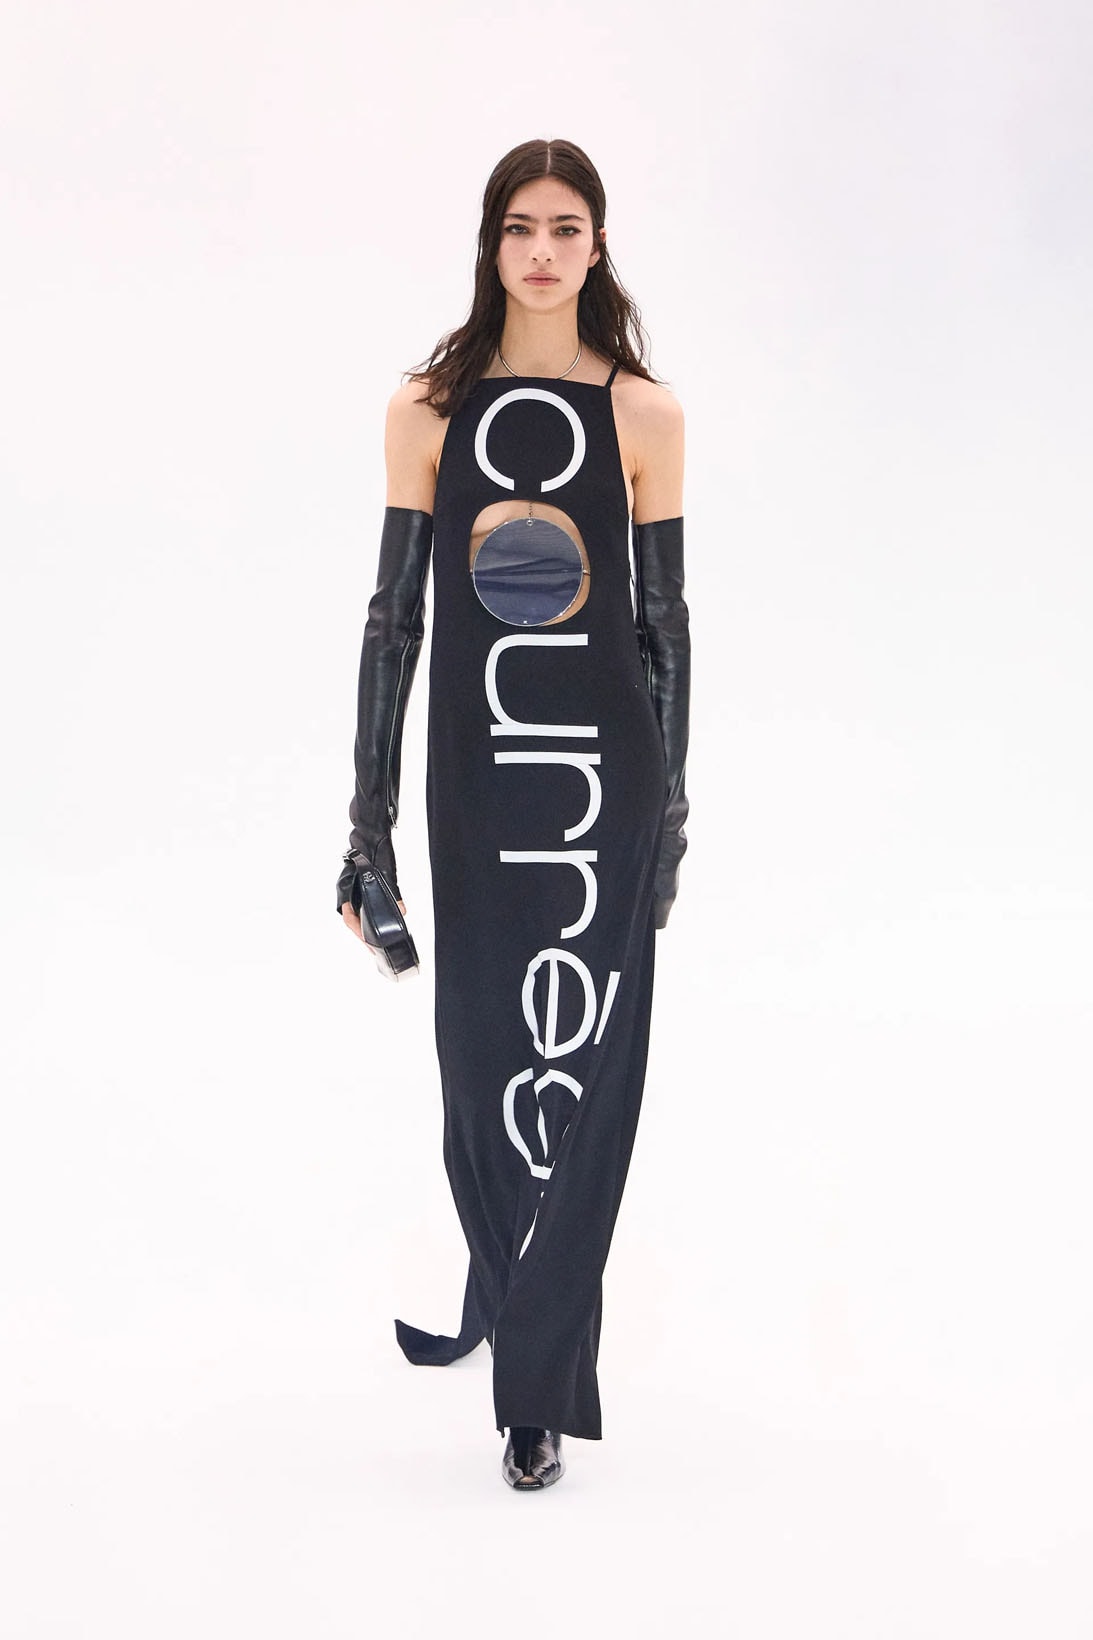 Courrèges Fall Winter Collection Runway Nicolas di Felice Paris Fashion Week Images